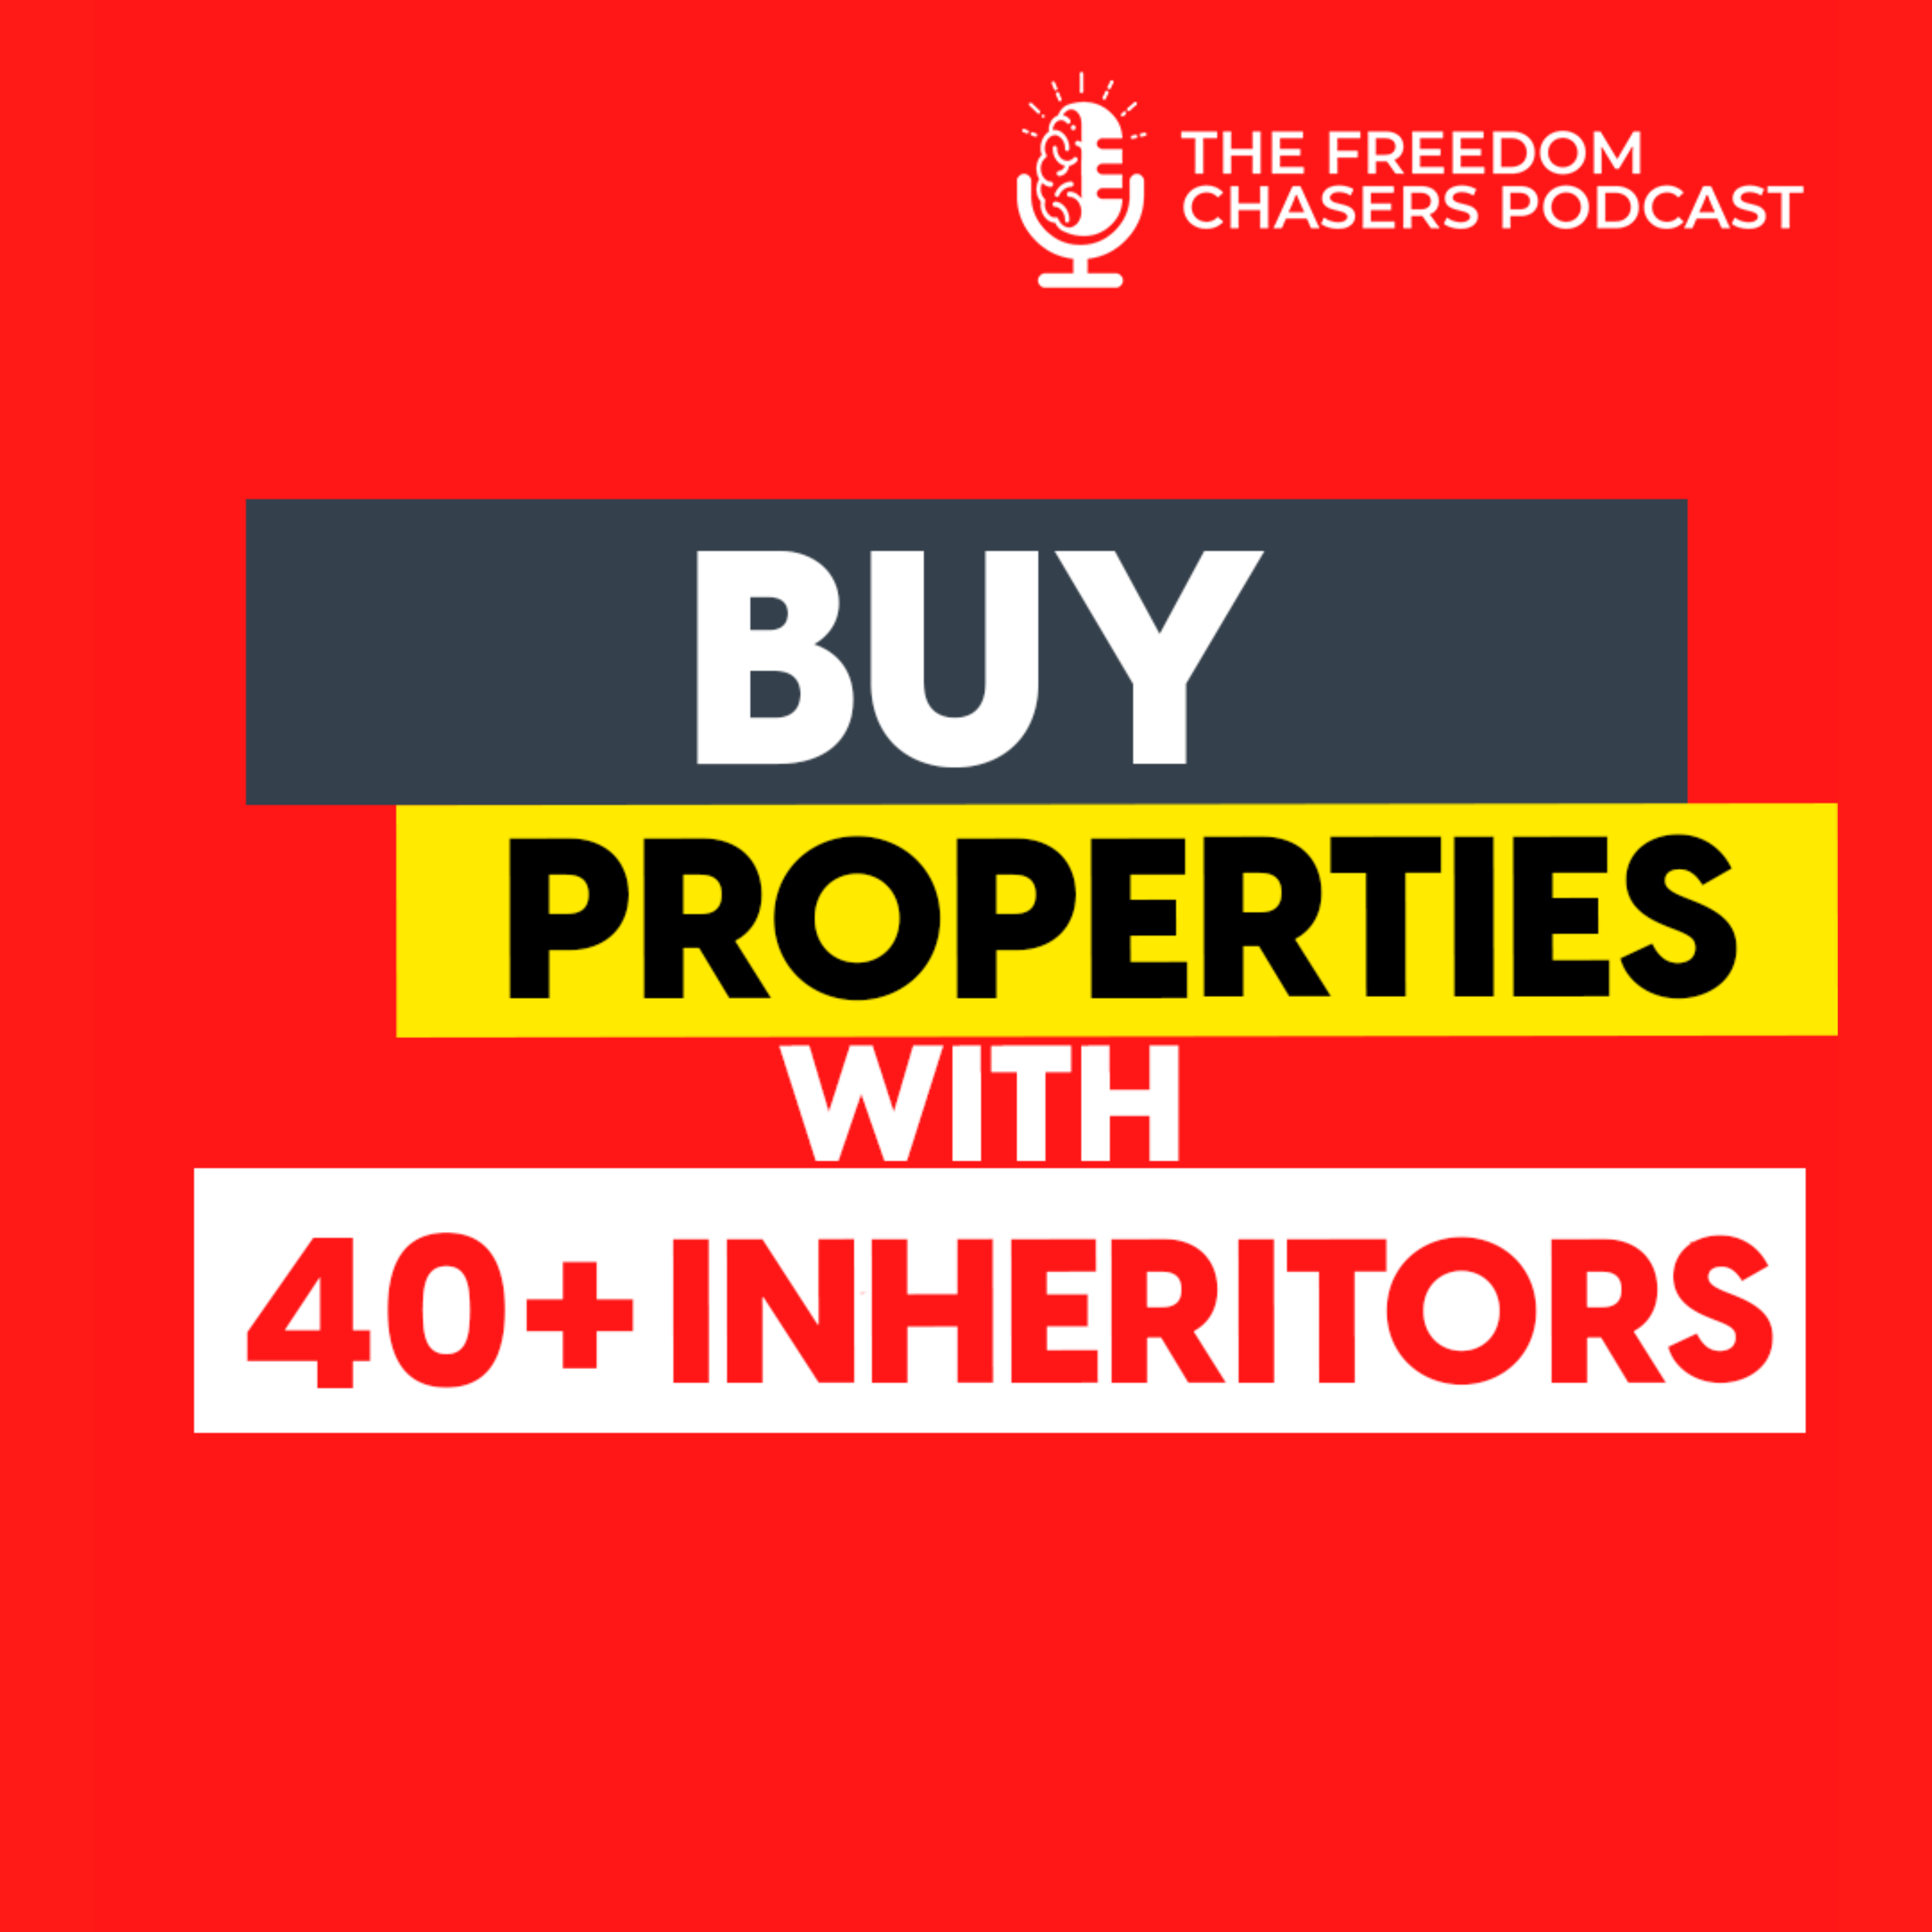 Investing In Properties With Dirty Title Issues The Right Way With Ryan MacDonald